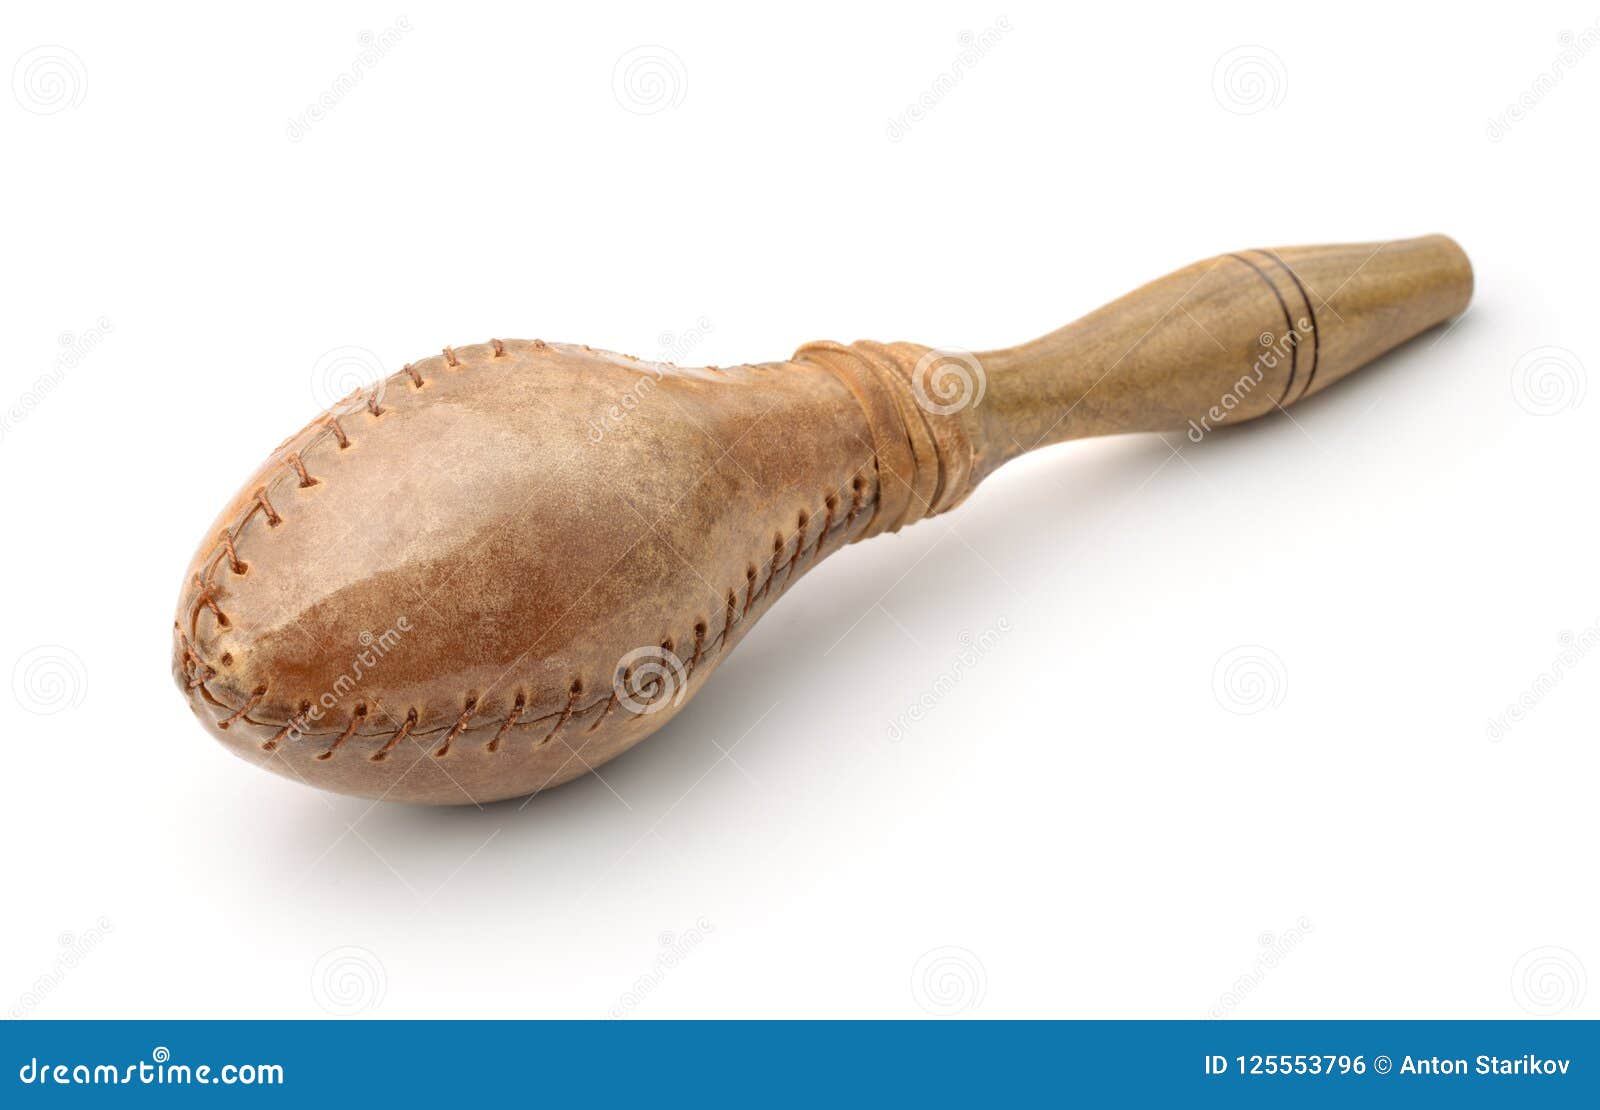 traditional maraca made of leather and wood